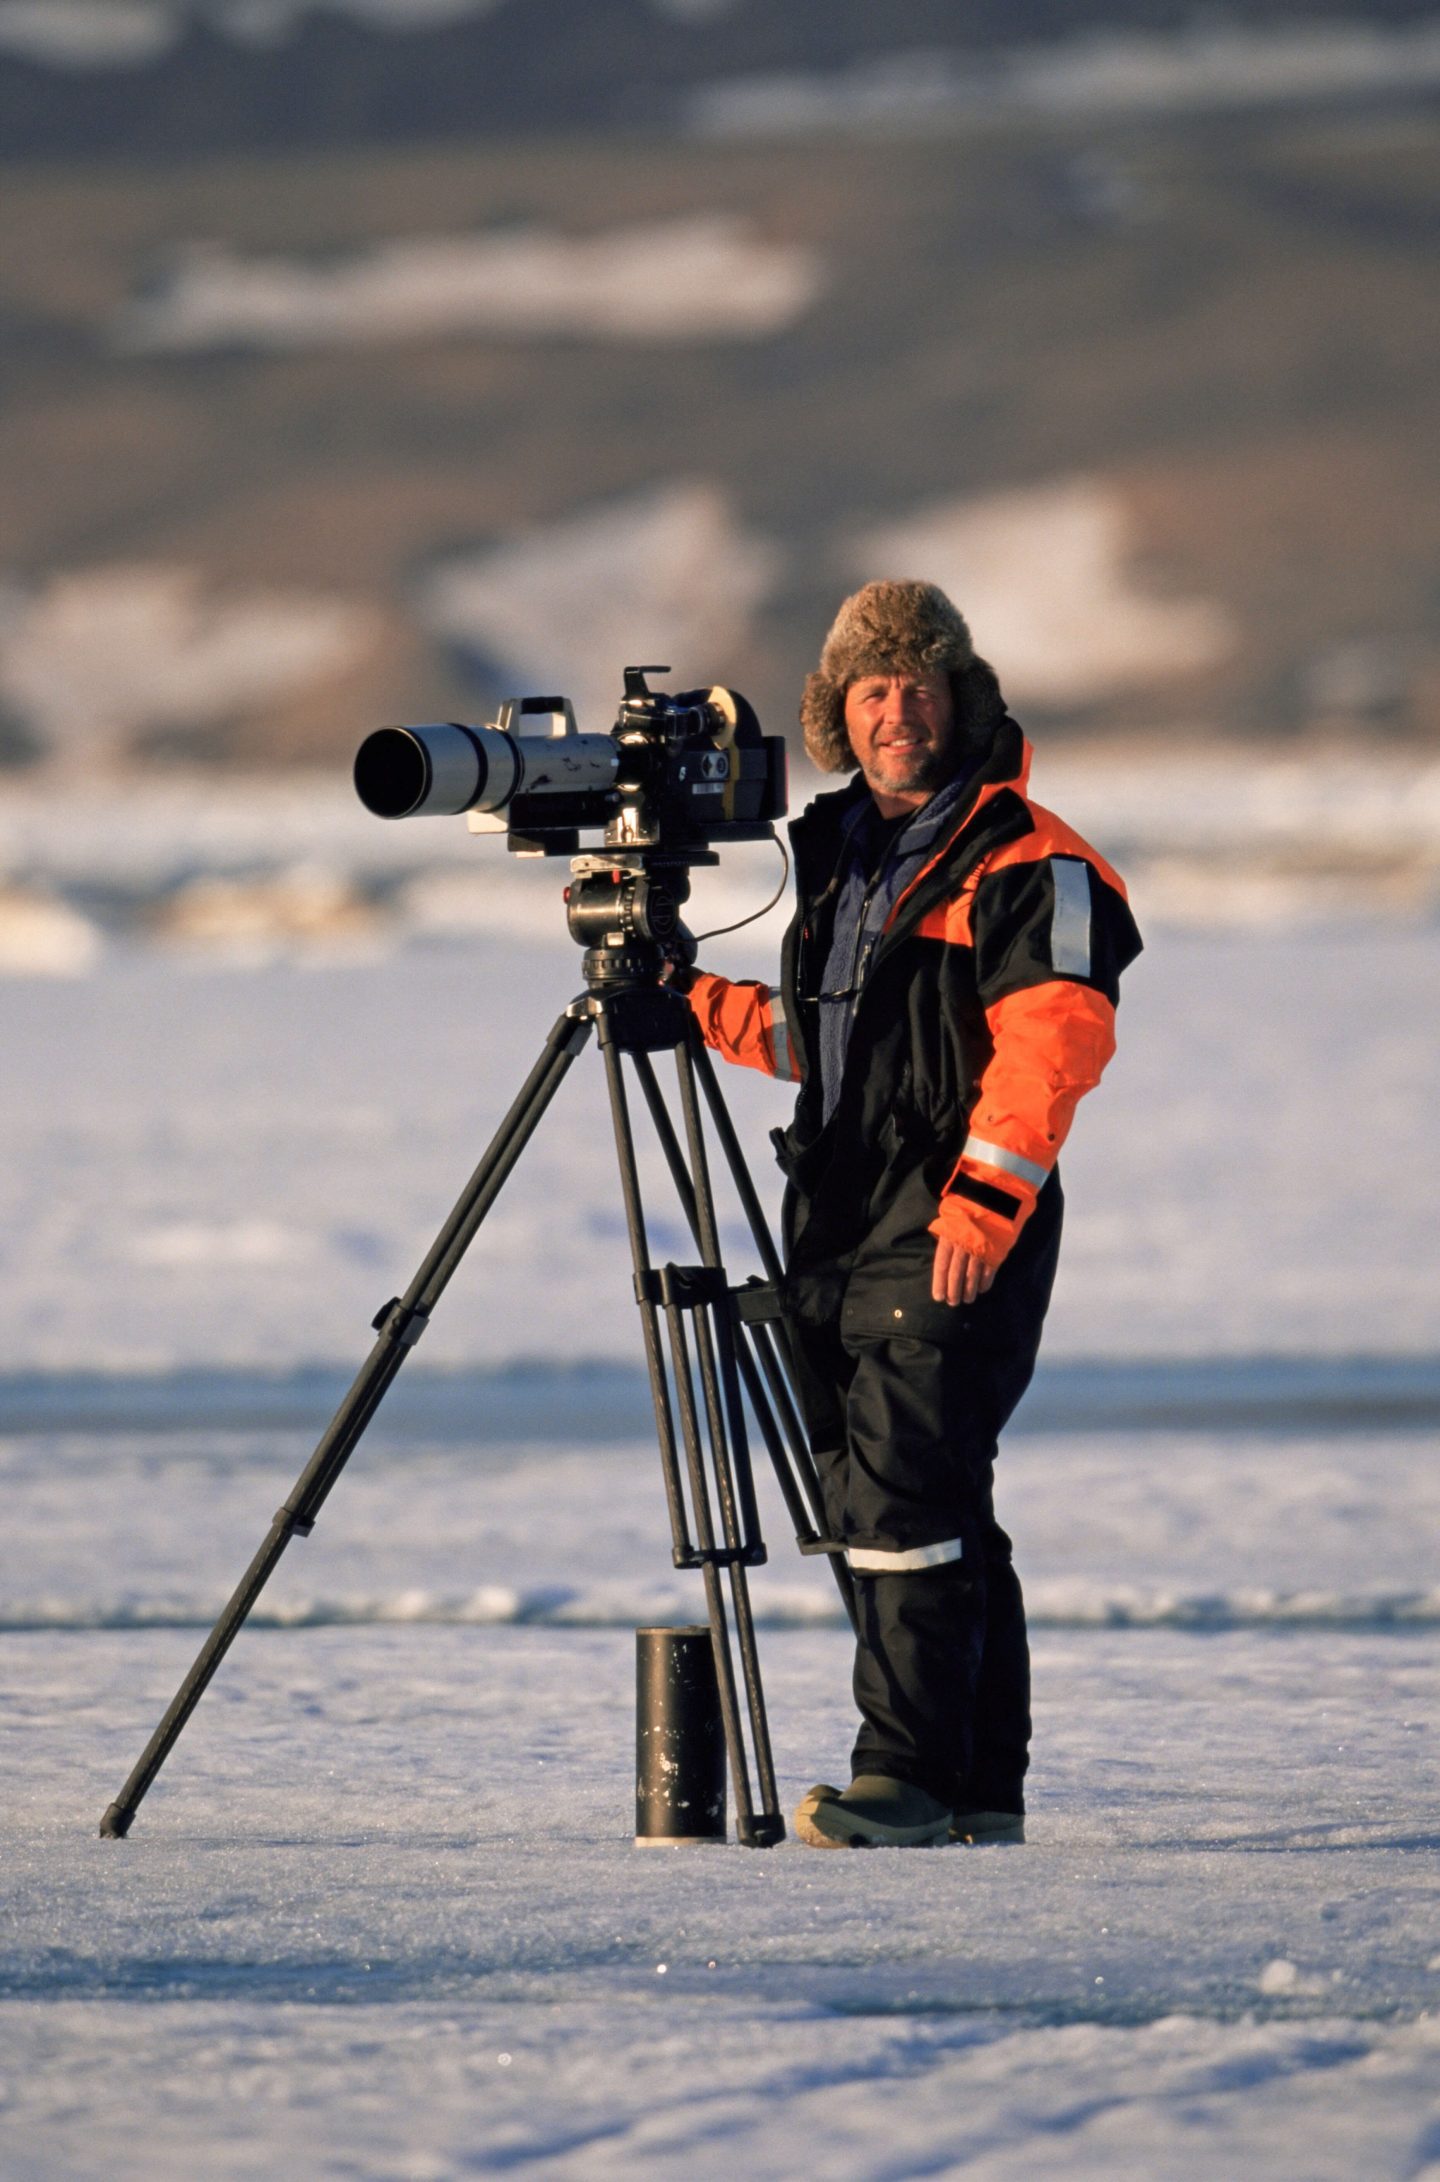 Doug Allan documentary film maker standing on ice with his camera